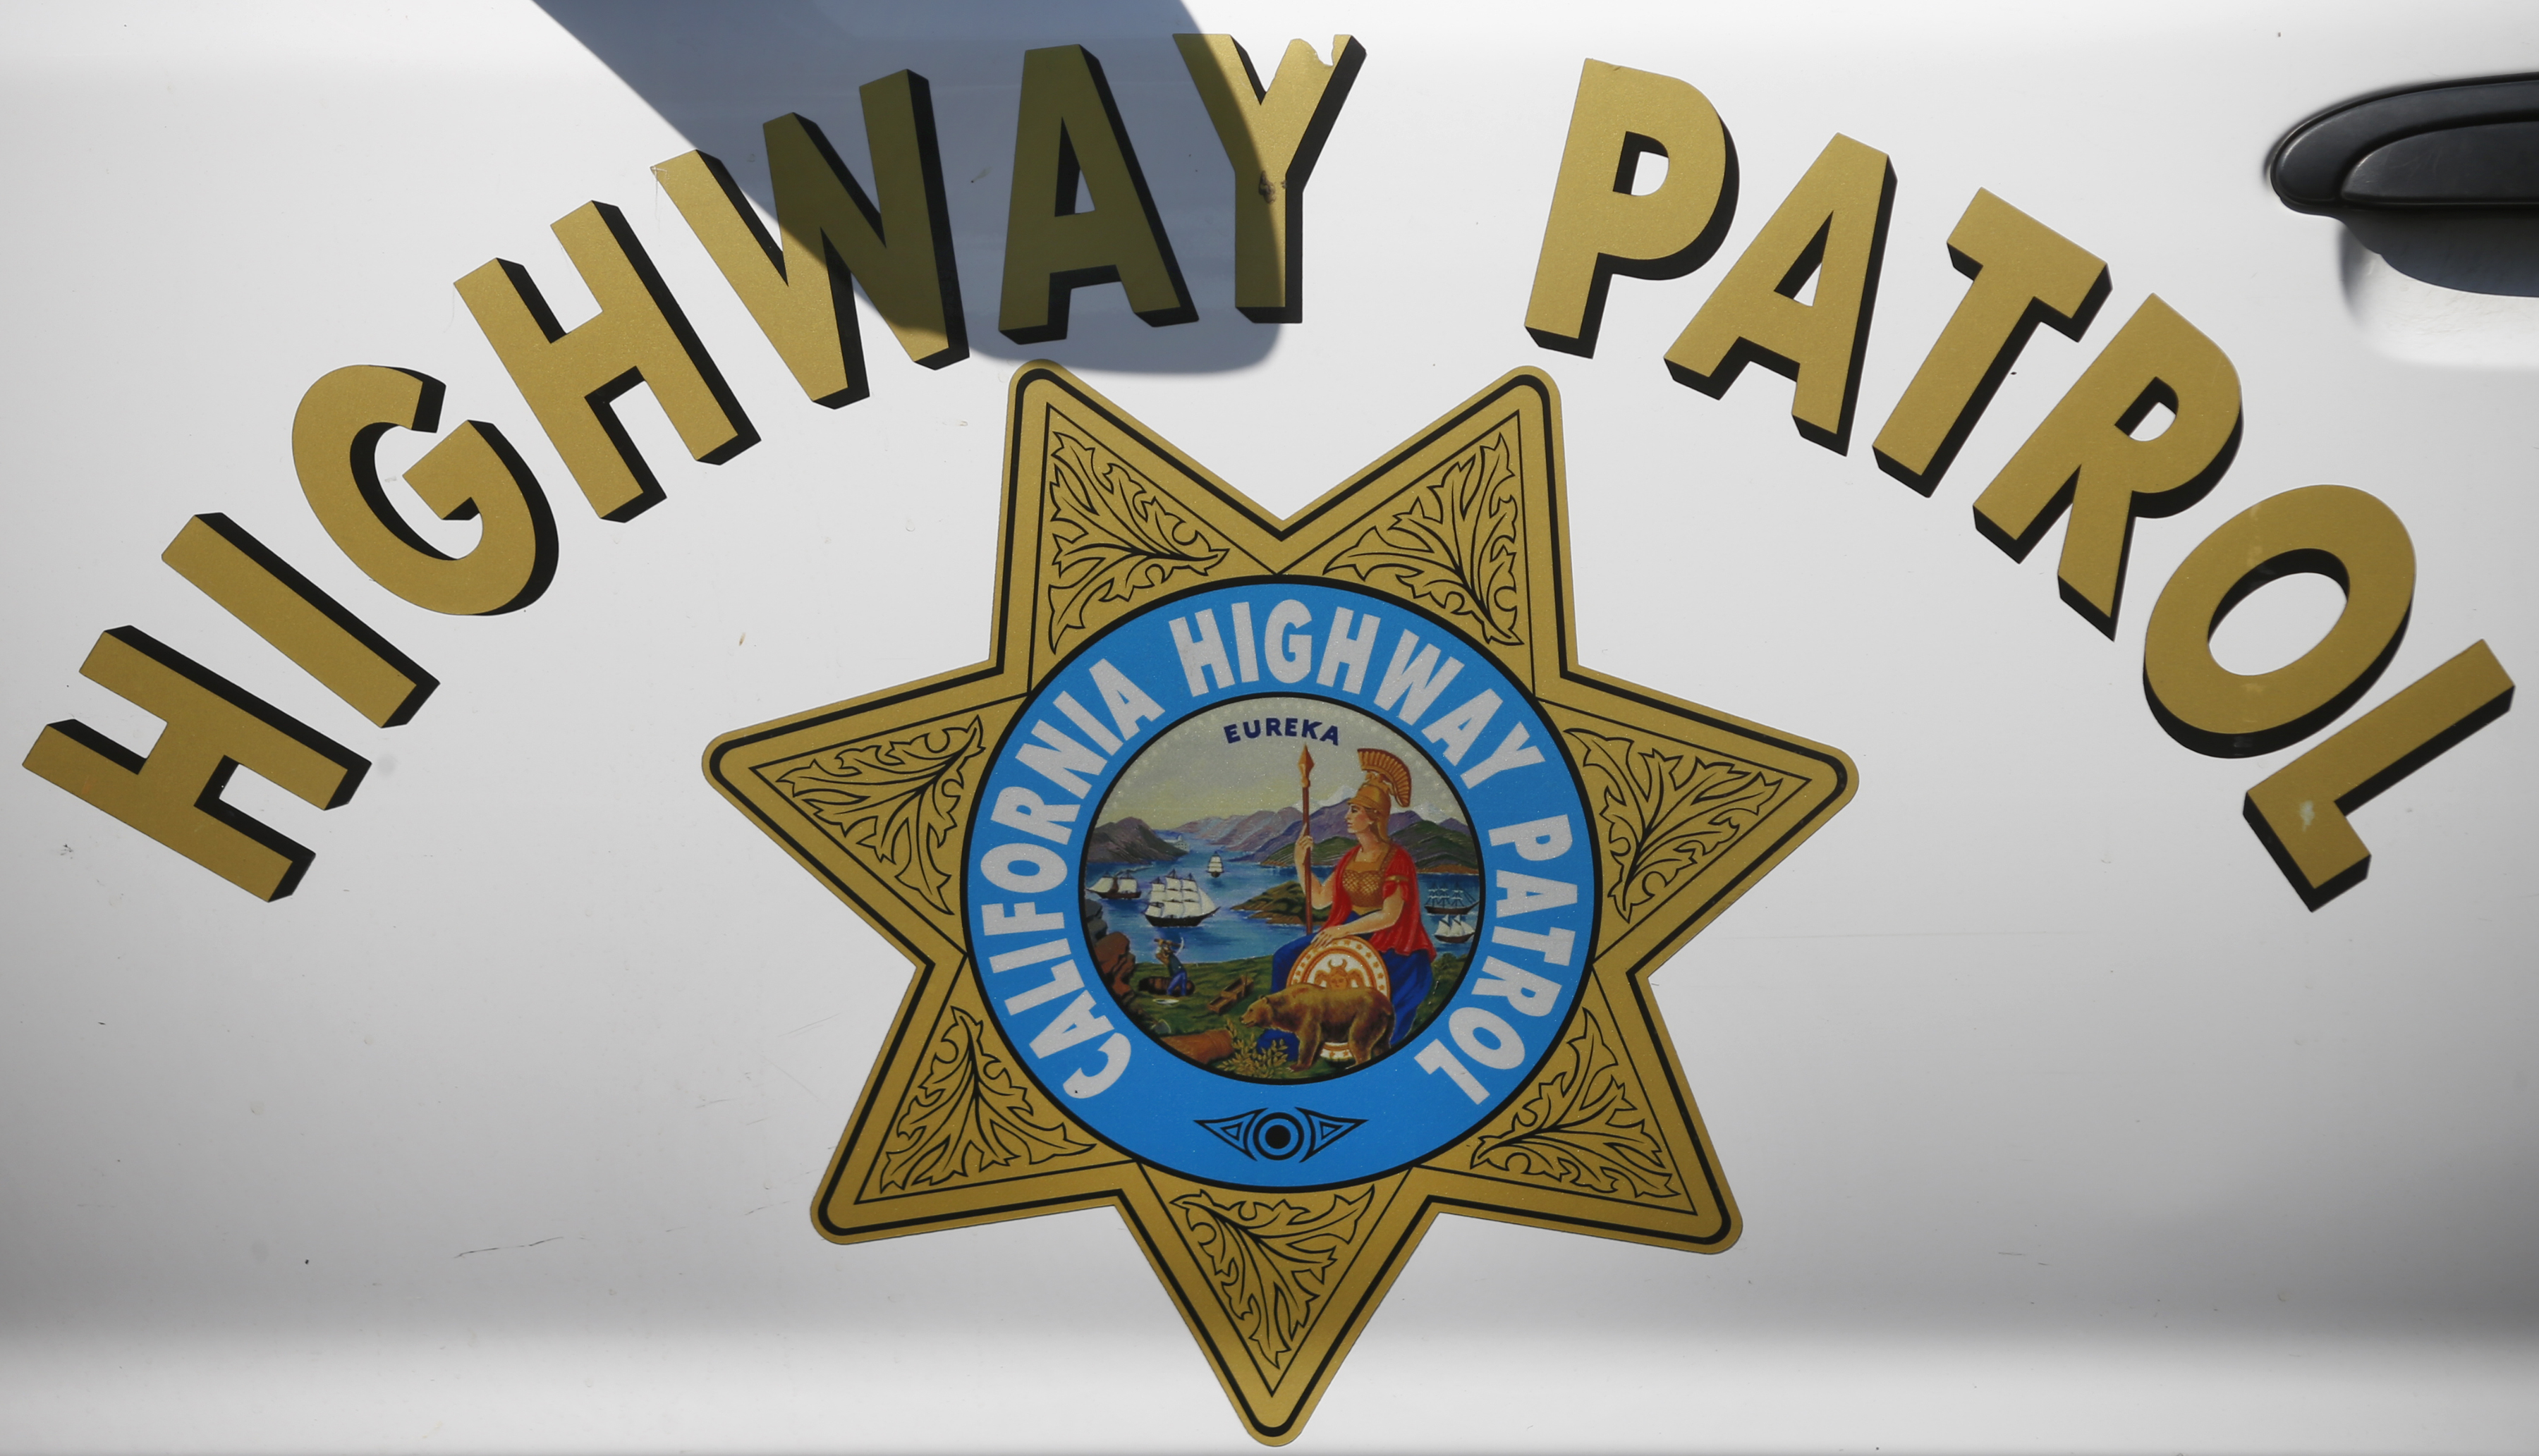 Marijuana is legal in California. So why is the CHP arresting delivery drivers?